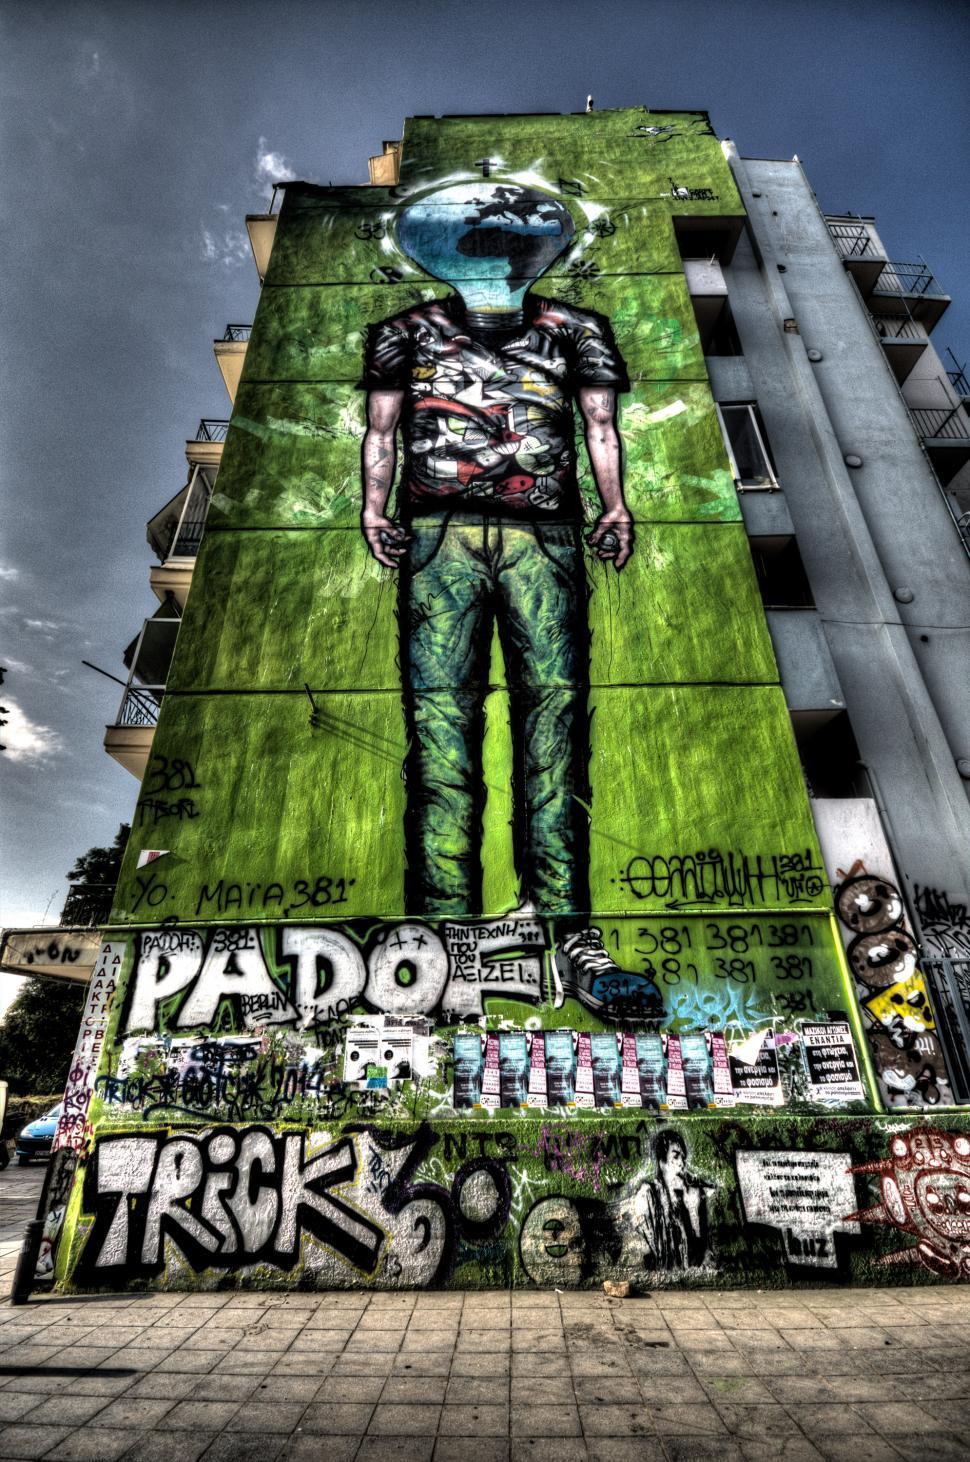 Free Image of Man Standing in Front of Graffiti-Covered Tall Building 